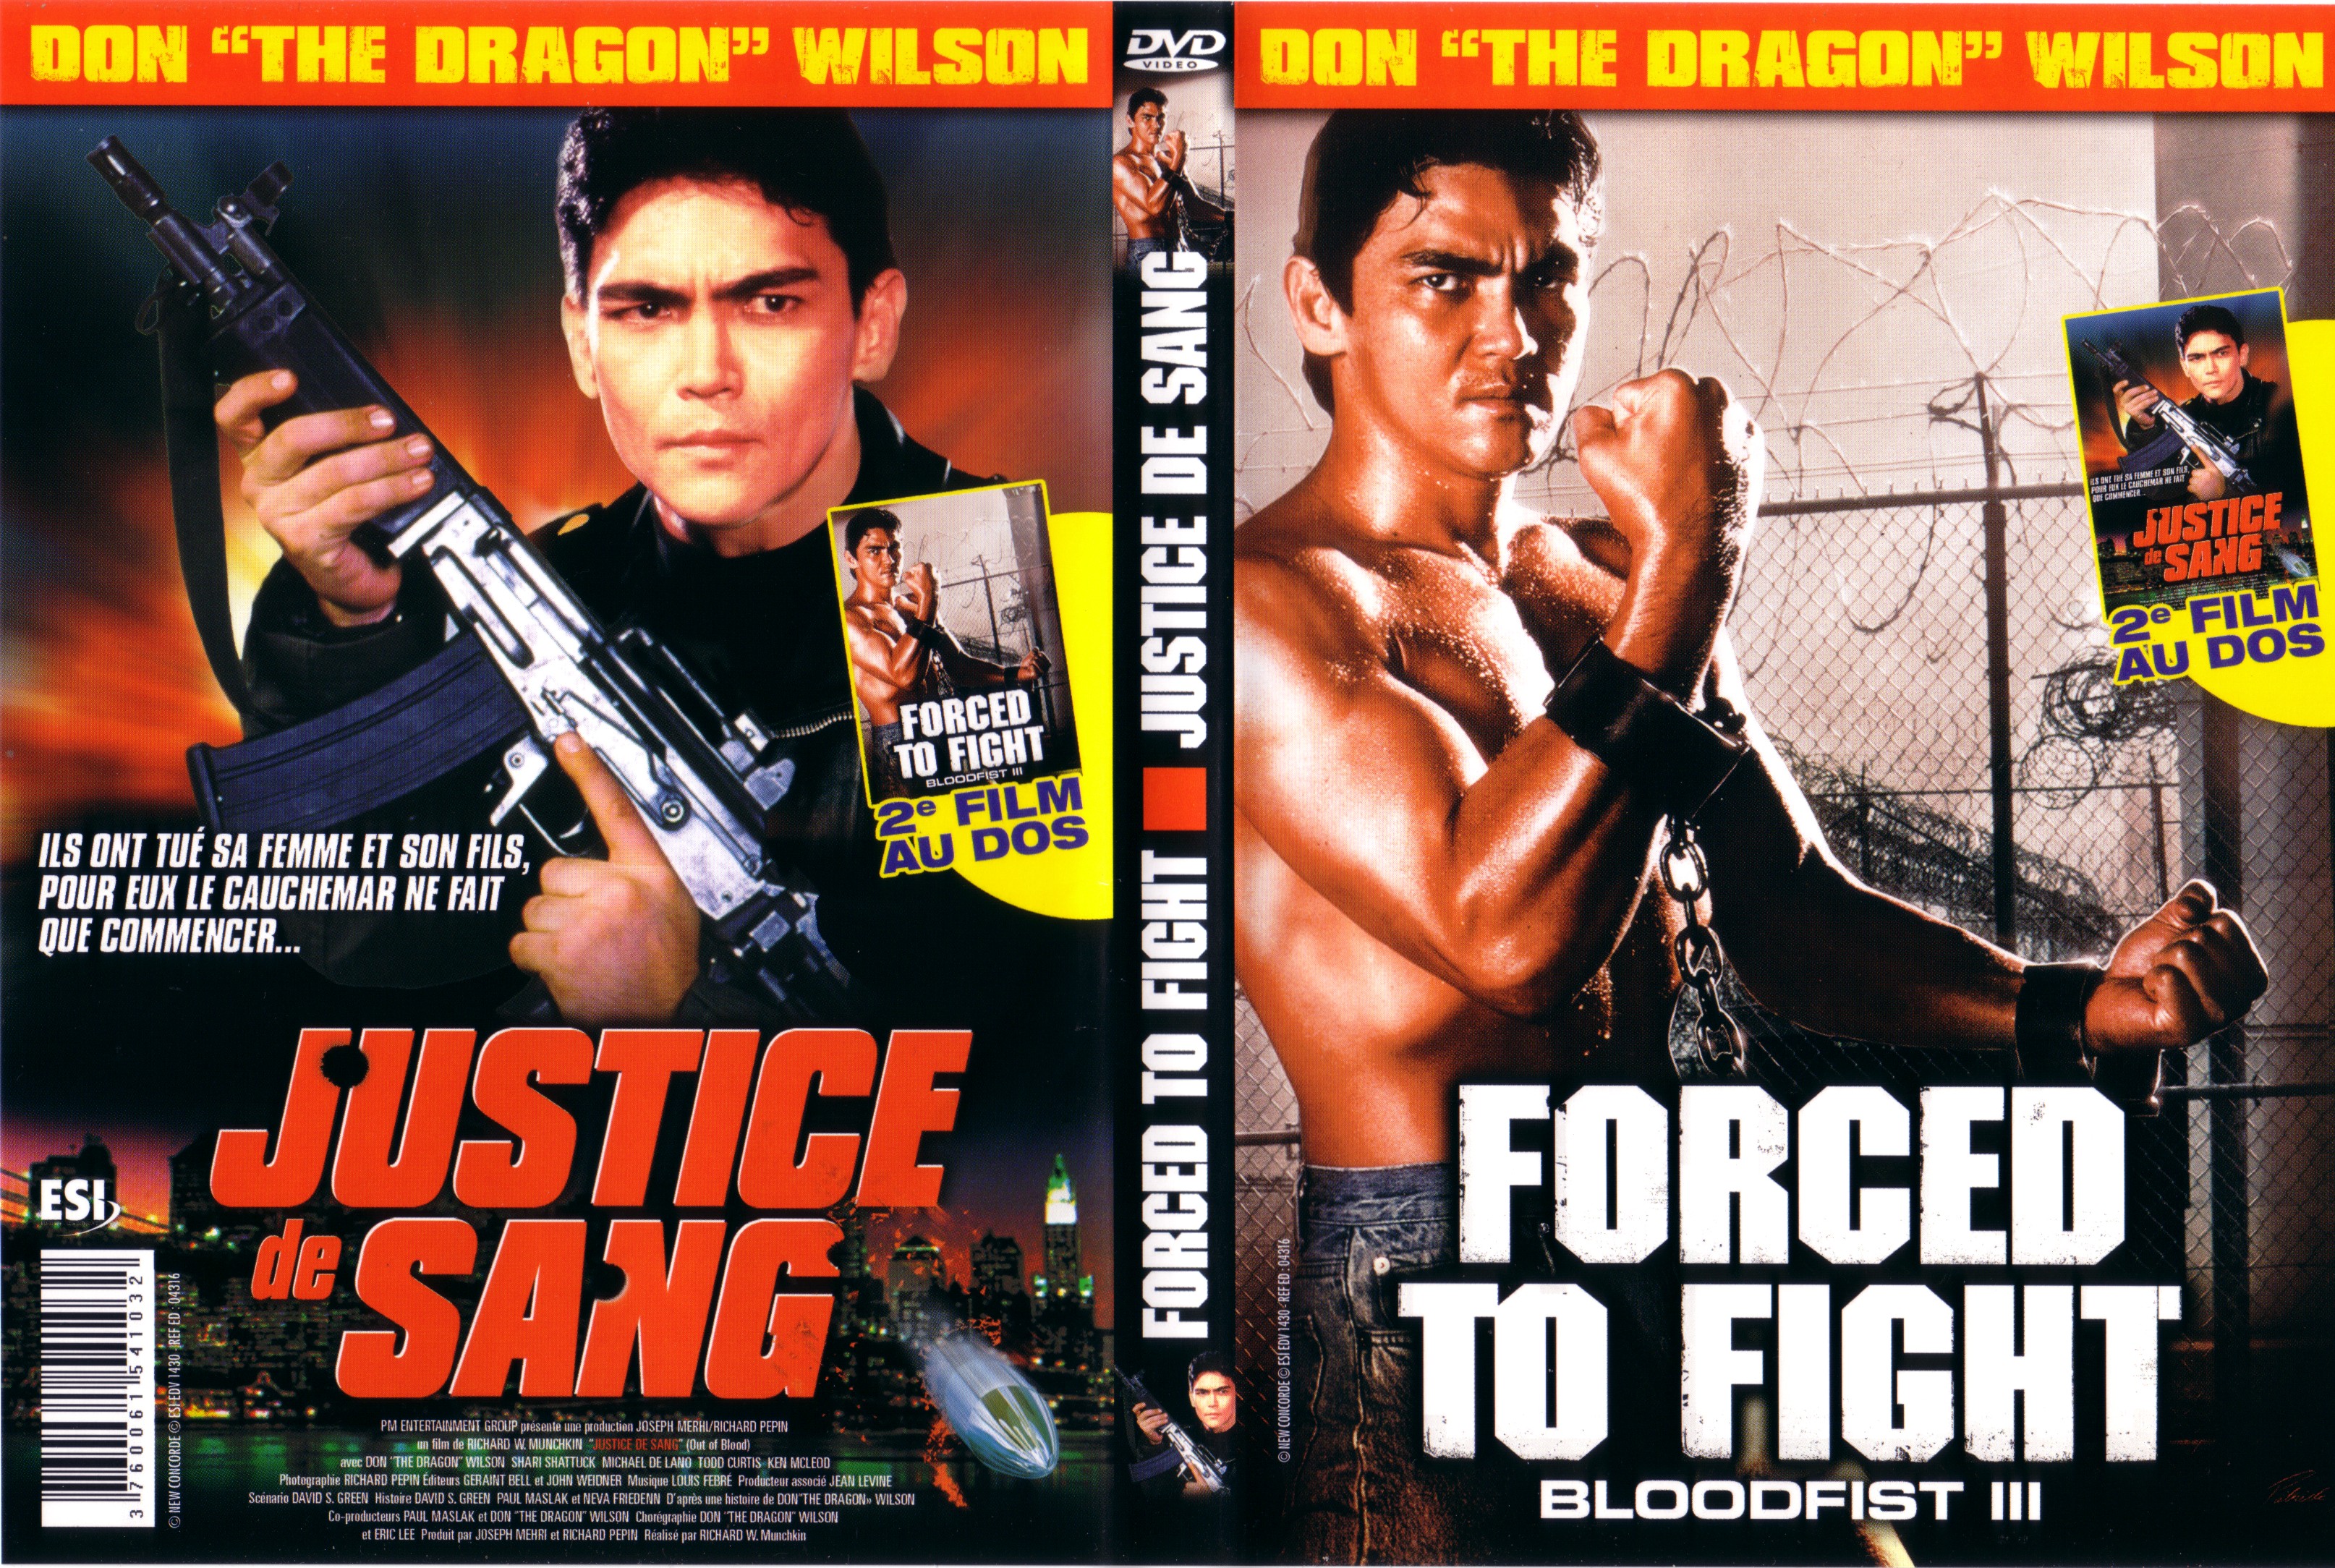 Jaquette DVD Forced to fight + Justice de sang